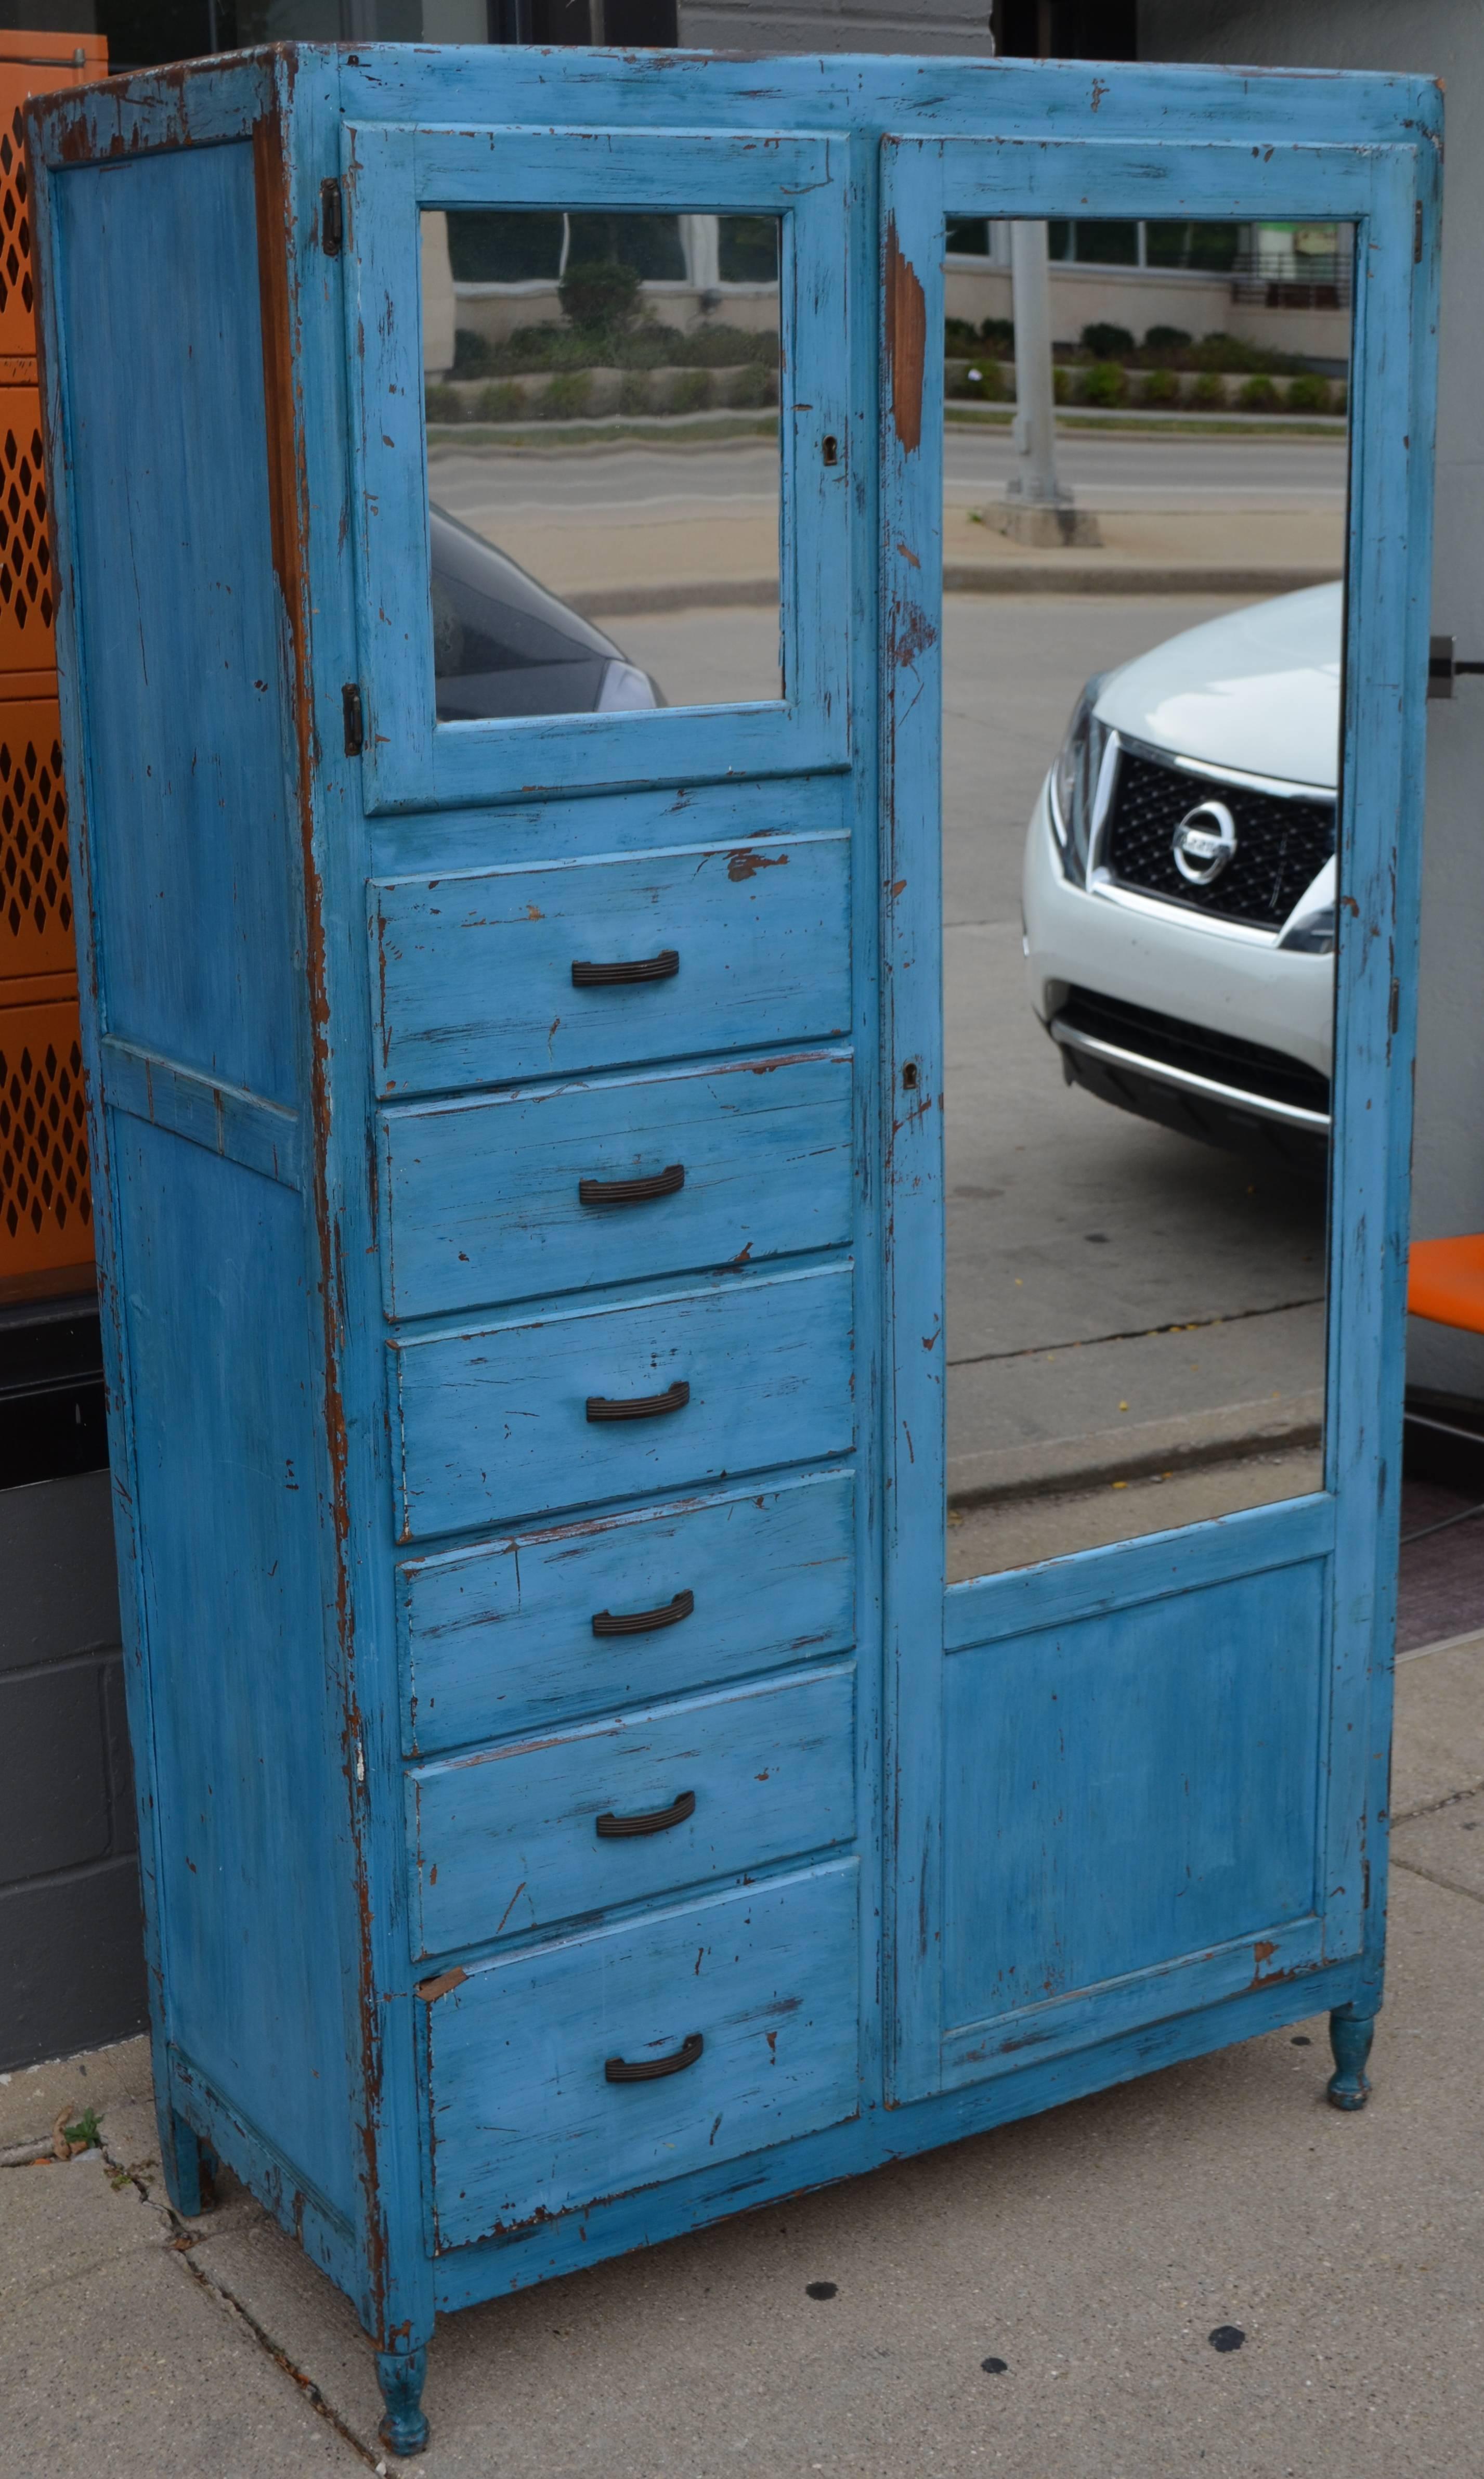 Country Storage Cupboard Closet, 1930s, in as-Found Blue for Home, Apartment, Cottage